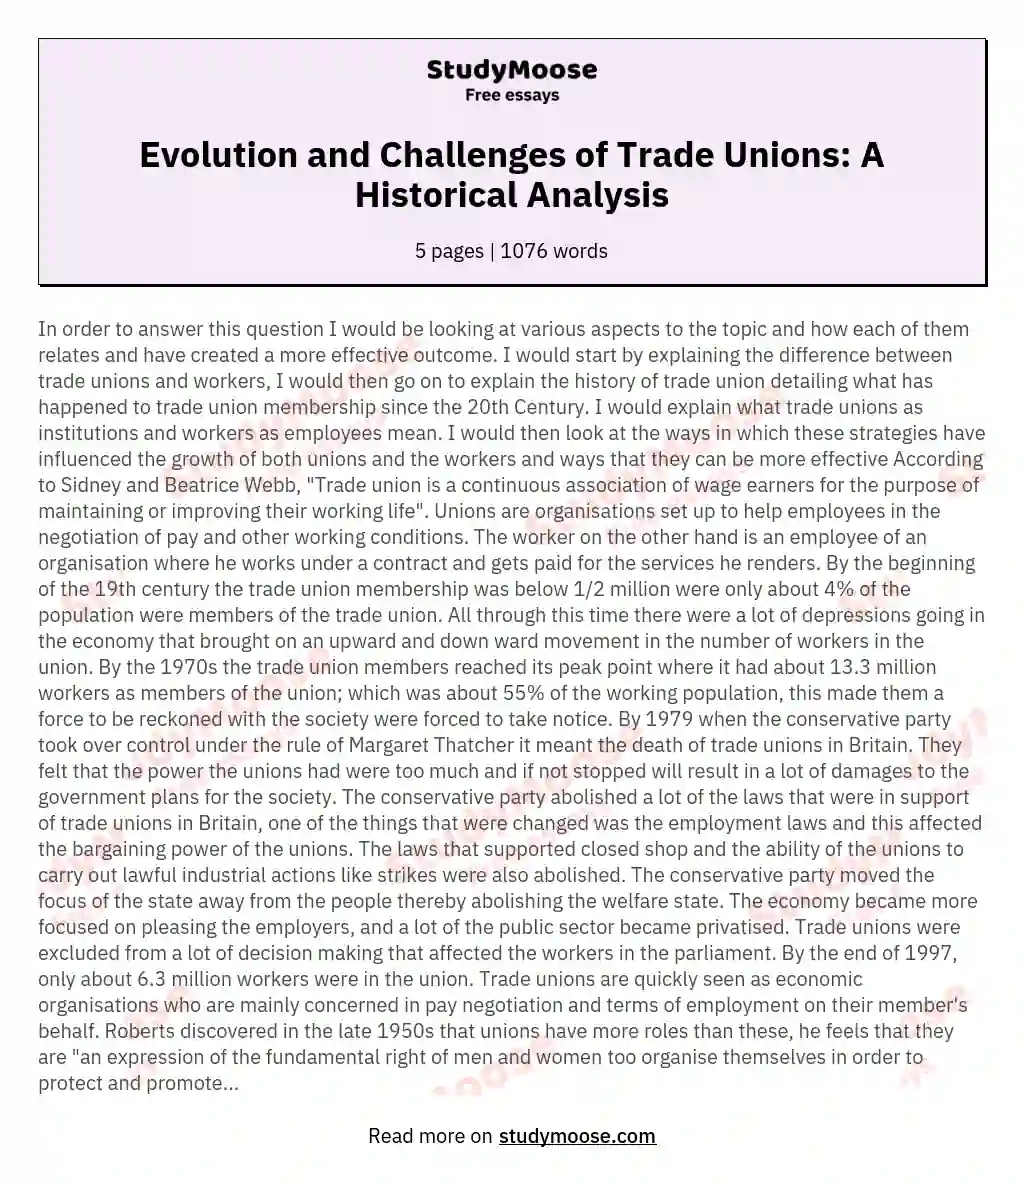 Evolution and Challenges of Trade Unions: A Historical Analysis essay